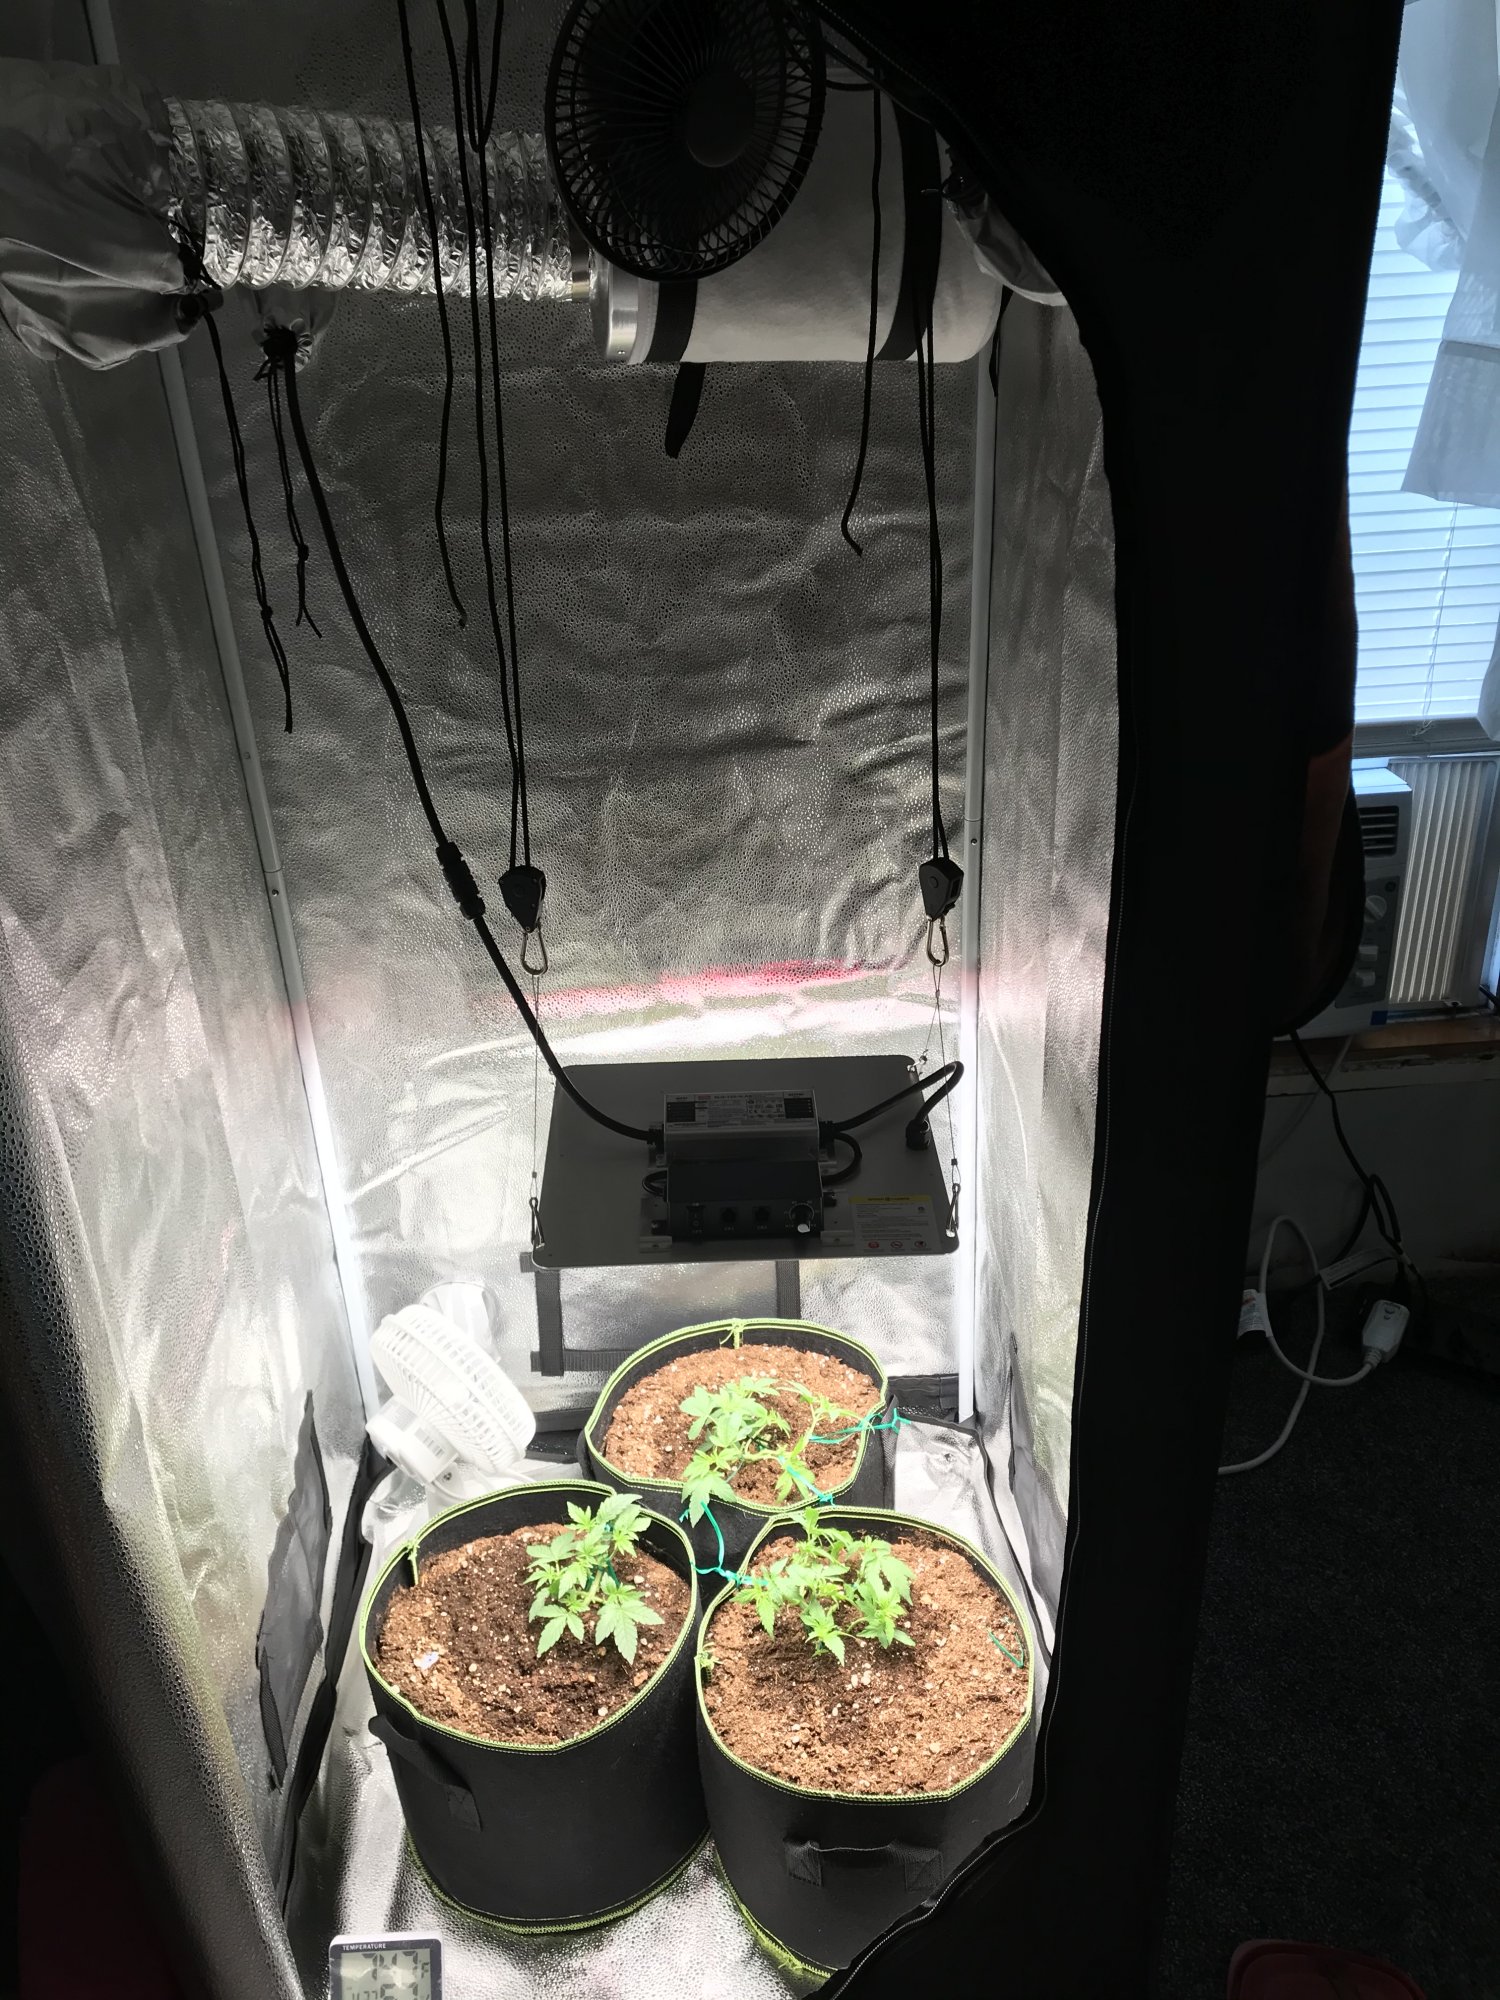 New to this forum and indoor growing any help would be much appreciated pictures in thread